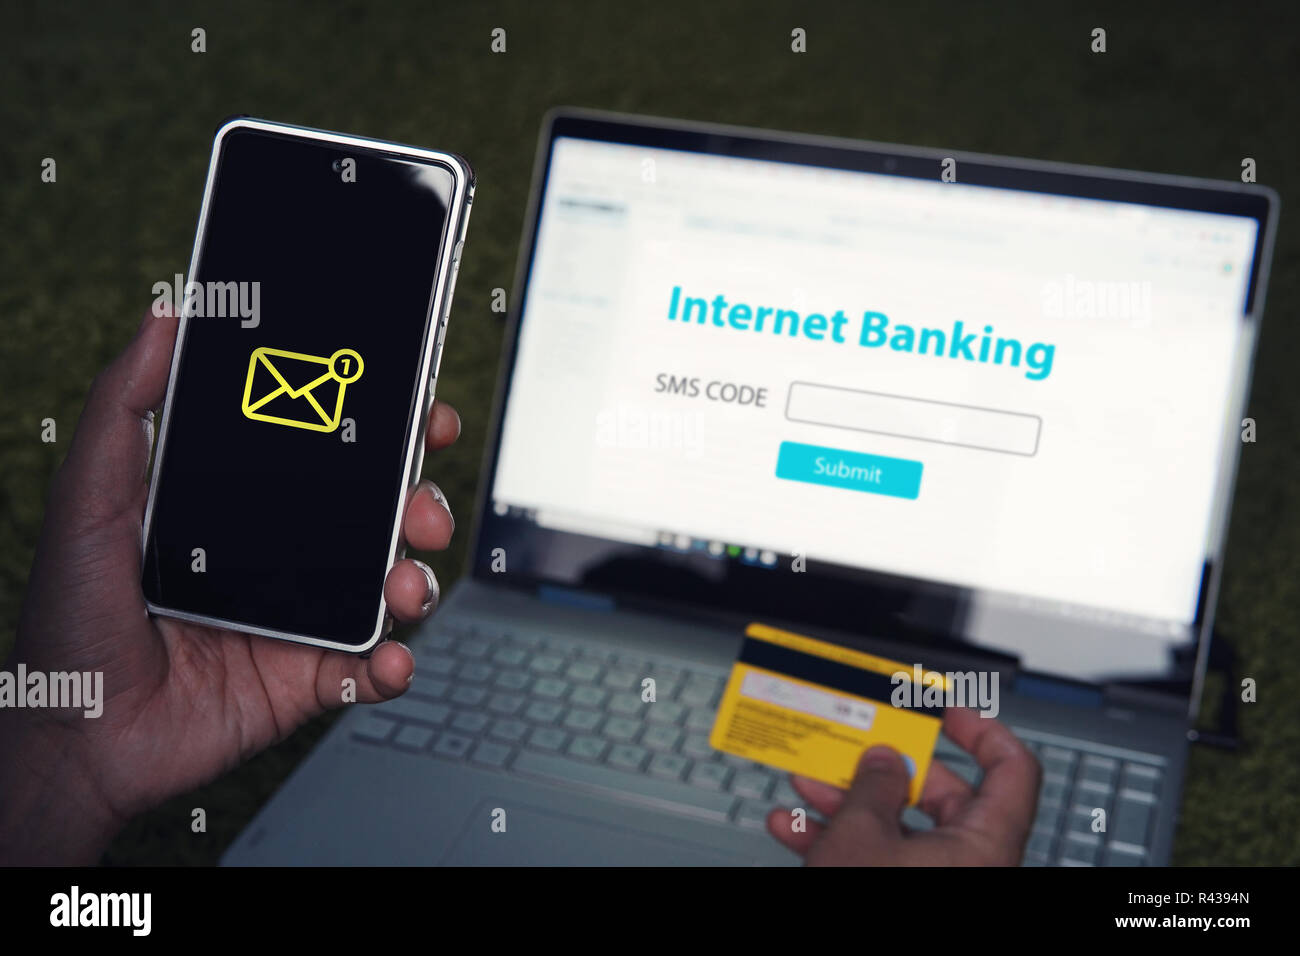 Internet Banking Online Payment Technology Concept. Came SMS password from your personal account mobile phone to enter the online Bank. online banking is protected by an individual password. Stock Photo